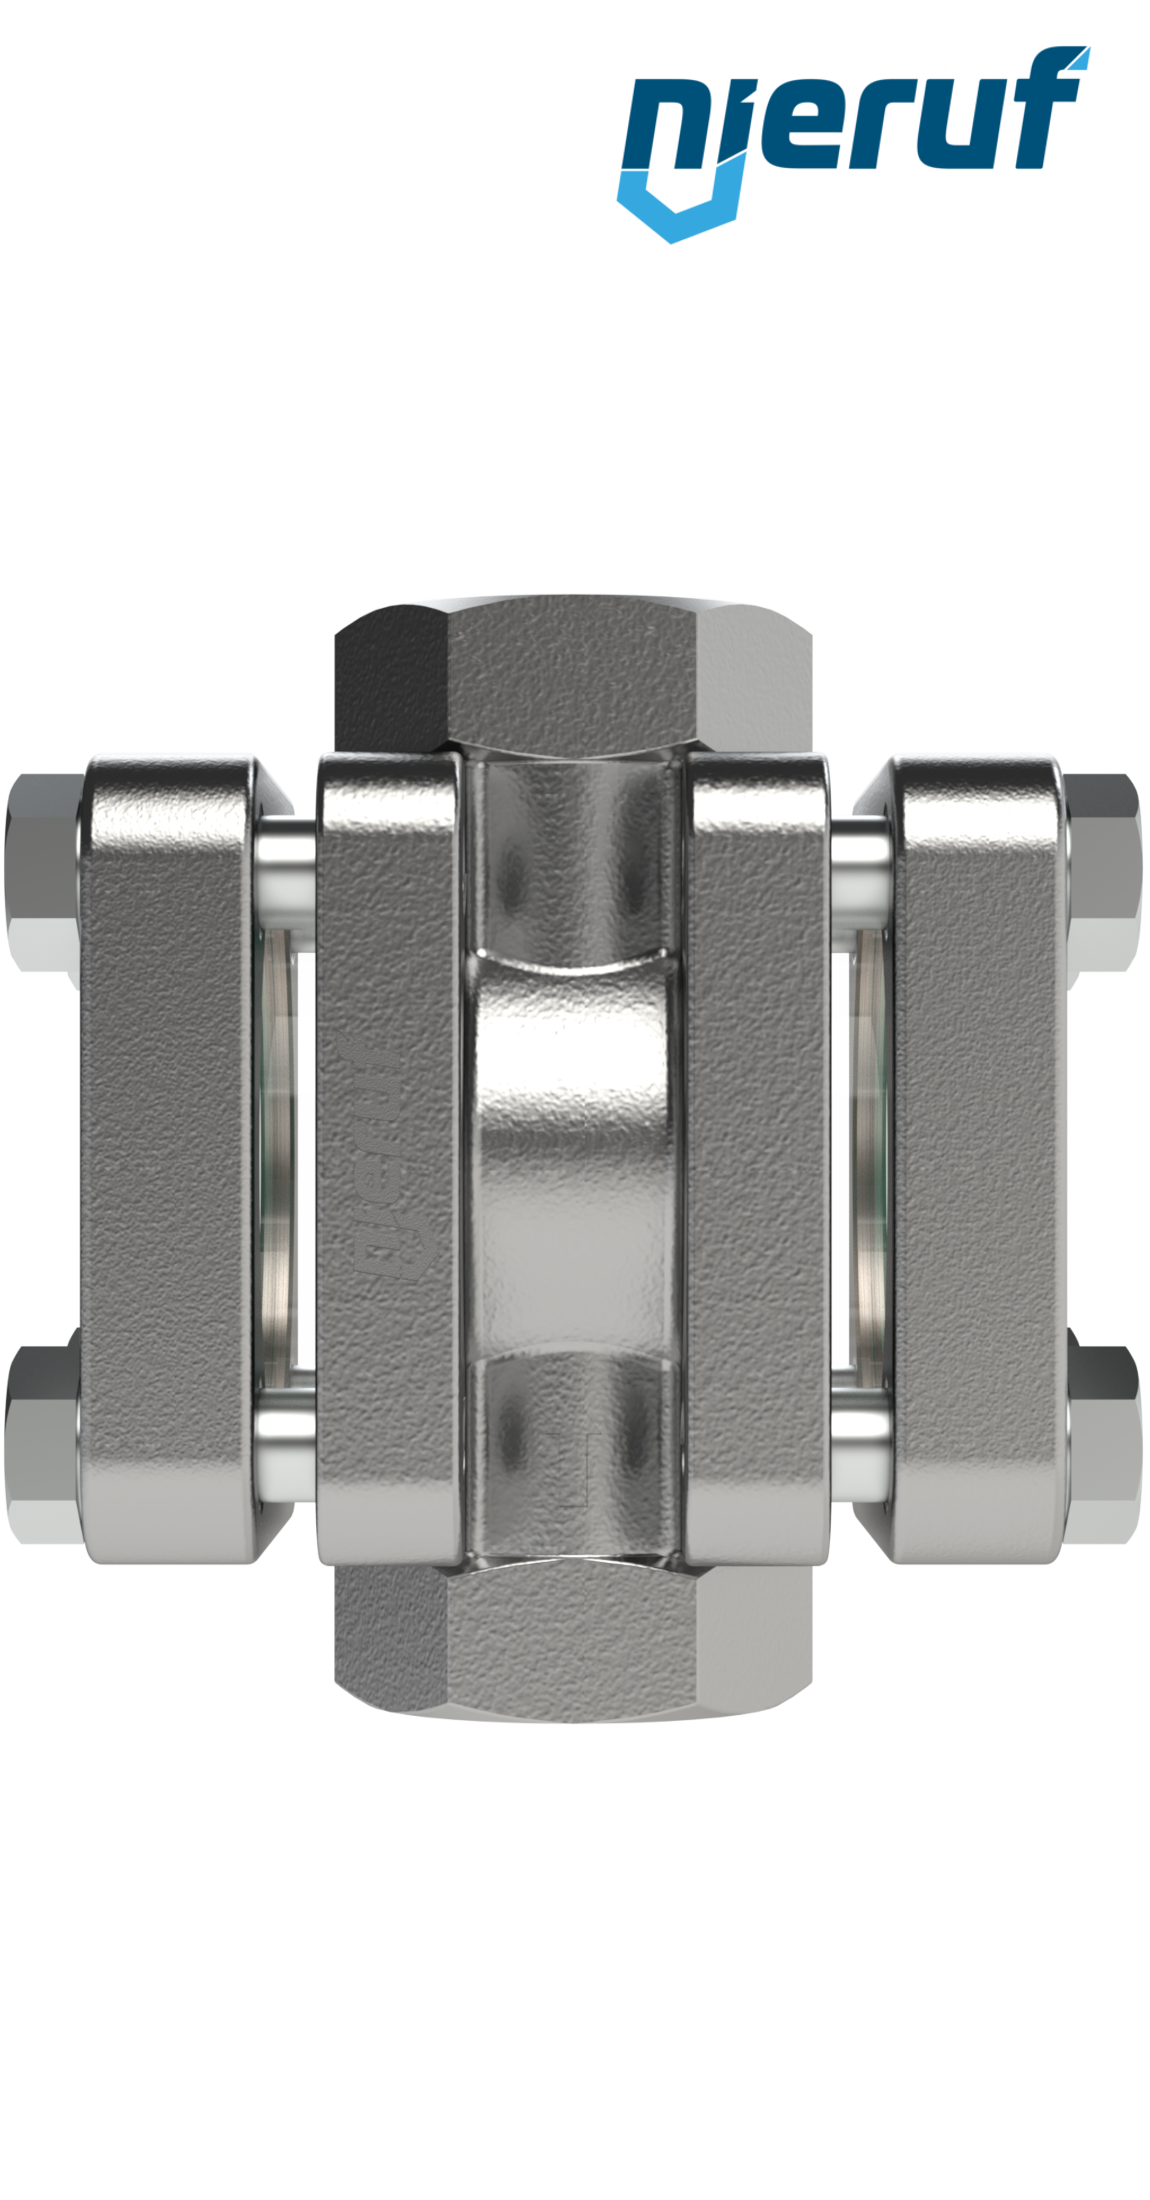 flow-through sight flow indicator DN40 - 1 1/2" Inch stainless steel borosilicate glass design with PTFE-spinner